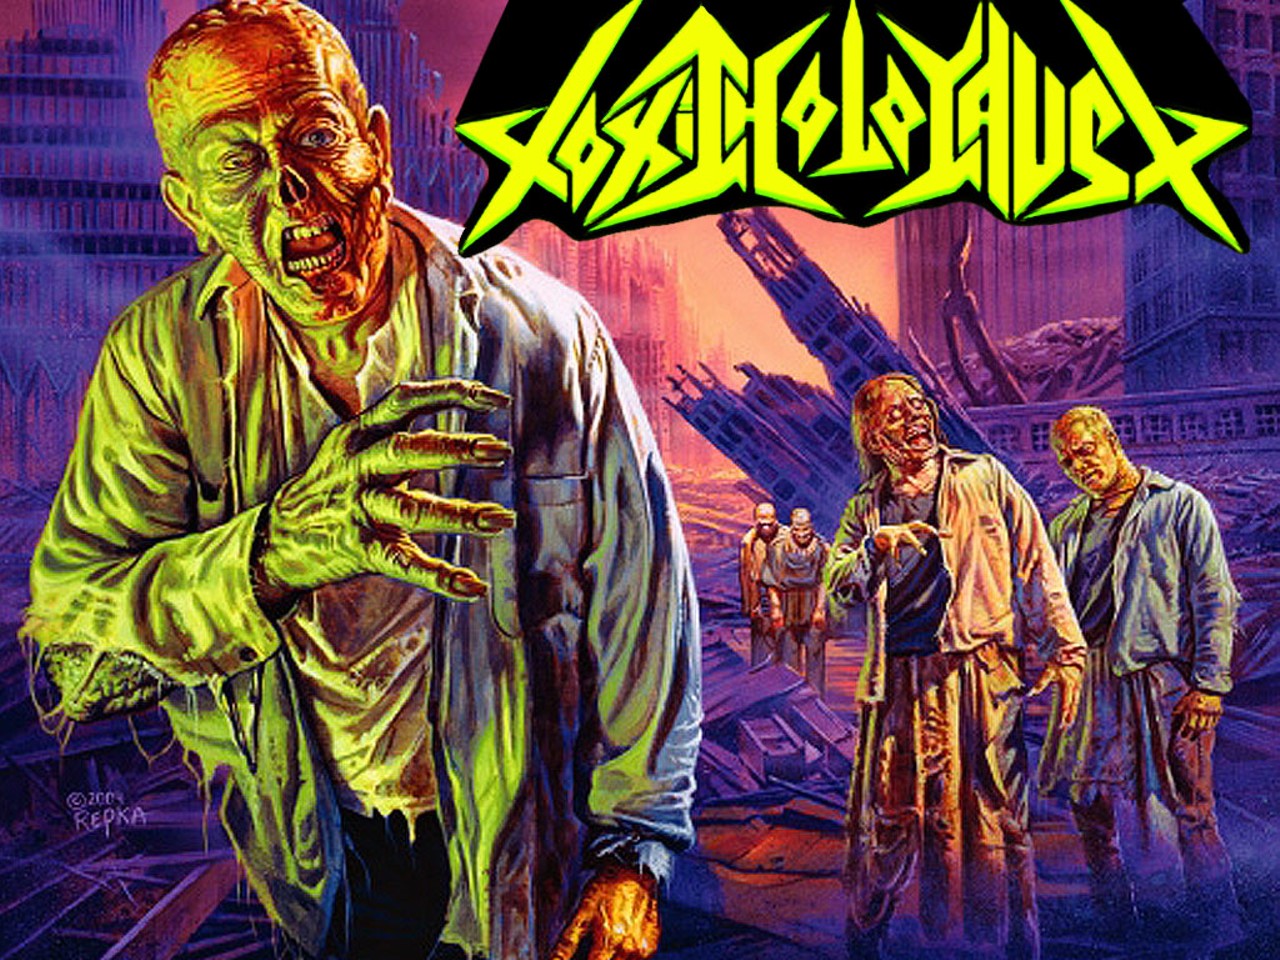 Toxic Holocaust
11/25 @ the Magic Stick, Detroit
Old school thrash metal from Portland. Like our own Axe Ripper, these guys have some amazing album art, in this case courtesy of Ed Repka. Think Sodom, Kreator, and the like.